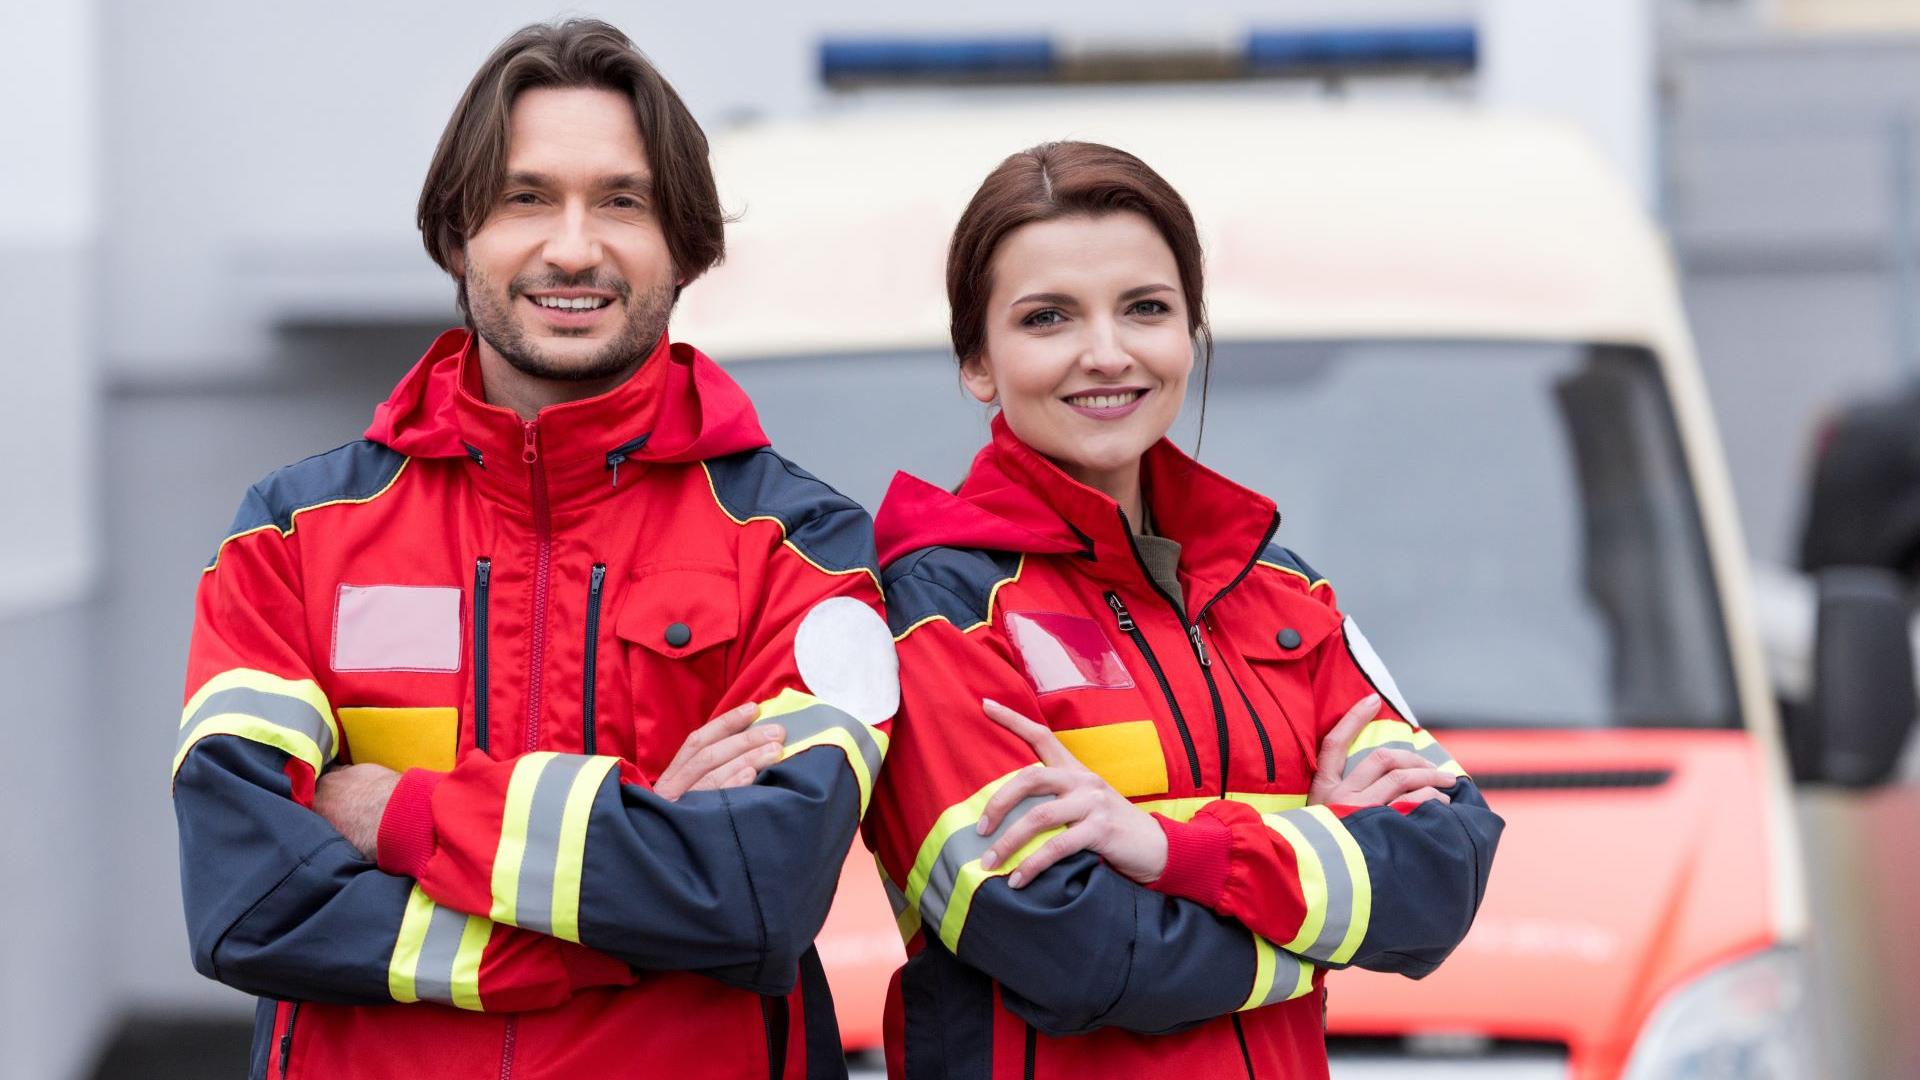 Telemedicine Solutions for Ambulances - Two paramedics standing in front of an ambulance car.